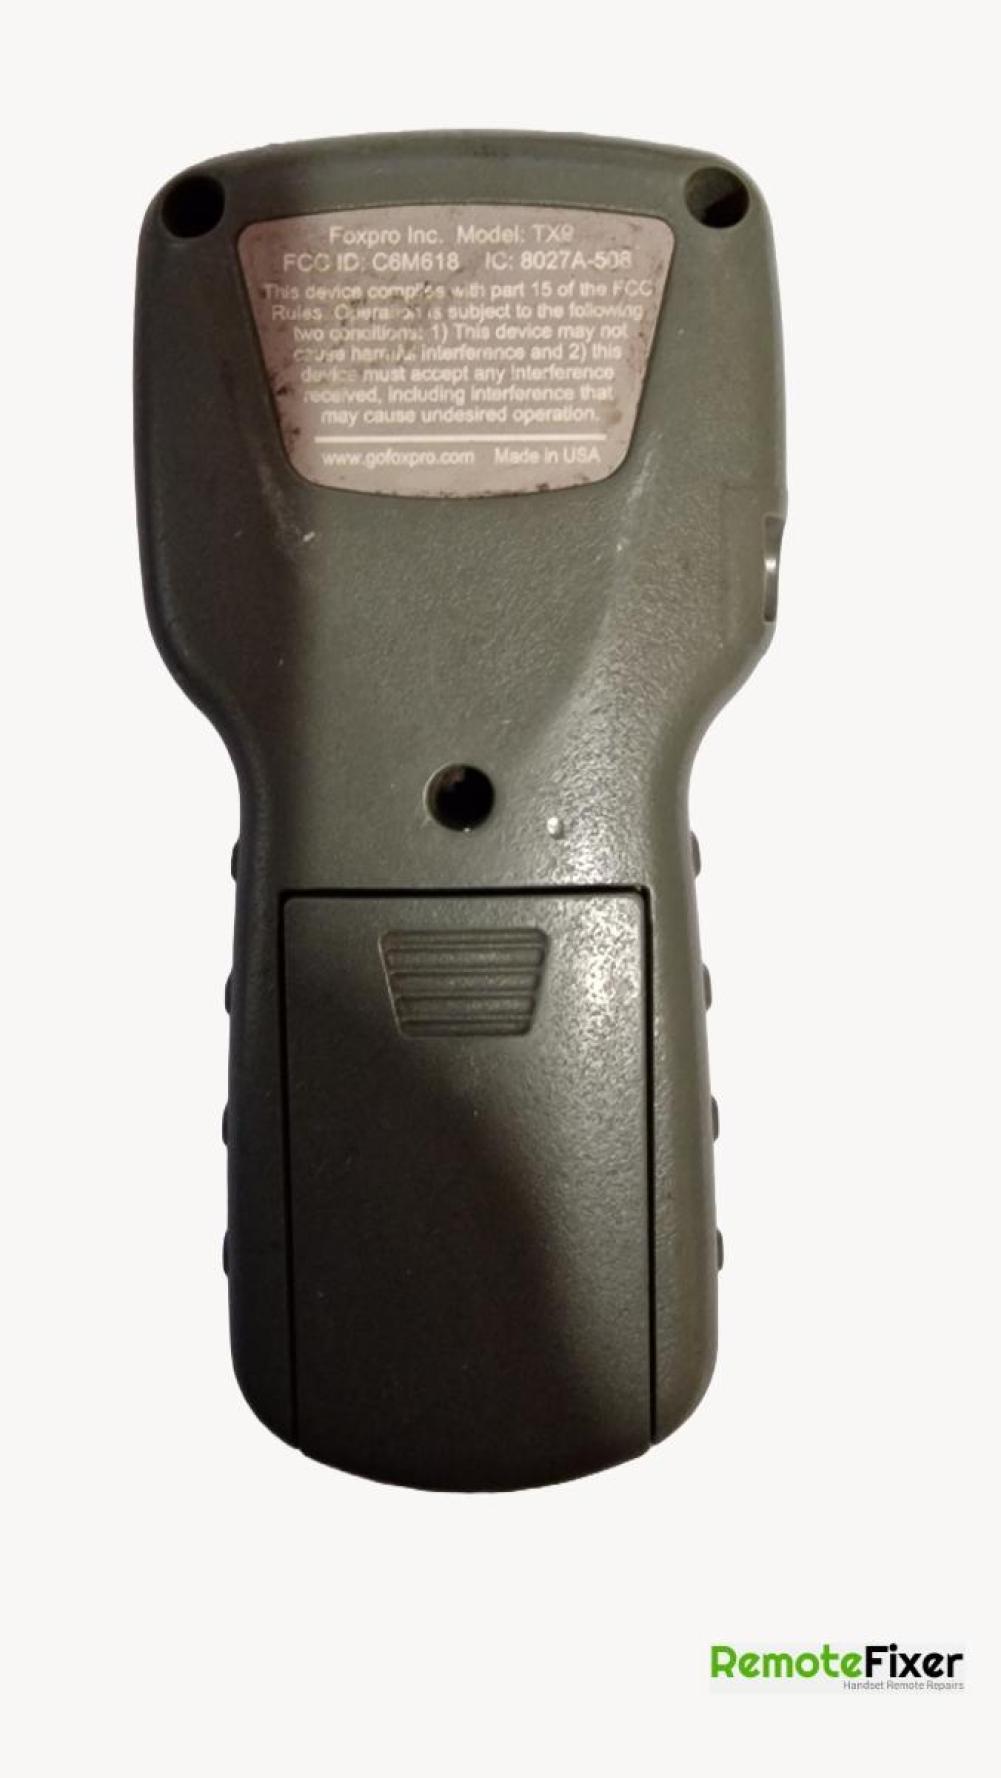 Foxpro  Remote Control - Back Image